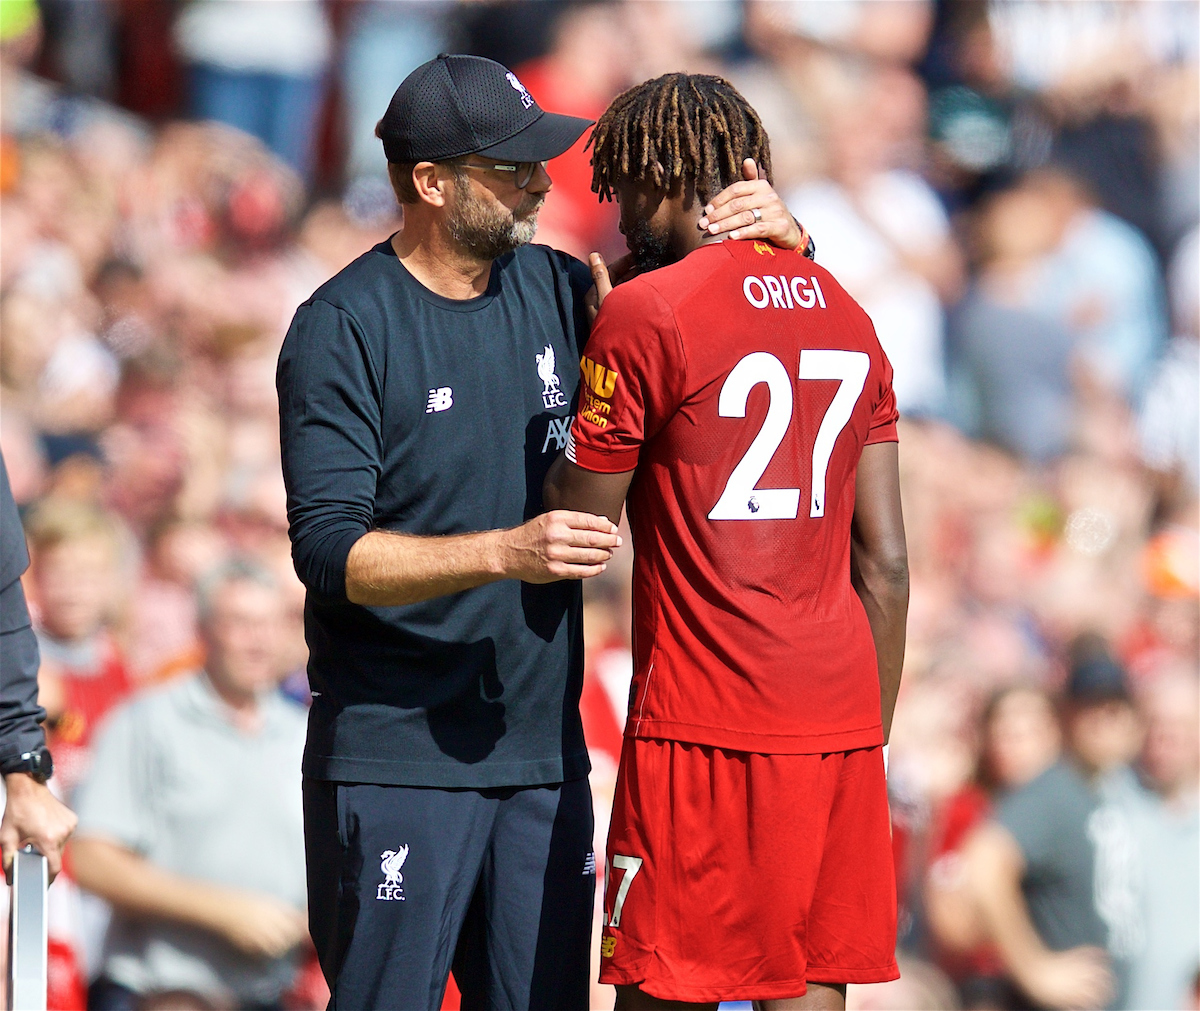 LIVERPOOL, ENGLAND - Saturday, September 14, 2019: Liverpool's manager Jürgen Klopp speaks with Divock Origi as he is substituted with an injury during the FA Premier League match between Liverpool FC and Newcastle United FC at Anfield. (Pic by David Rawcliffe/Propaganda)